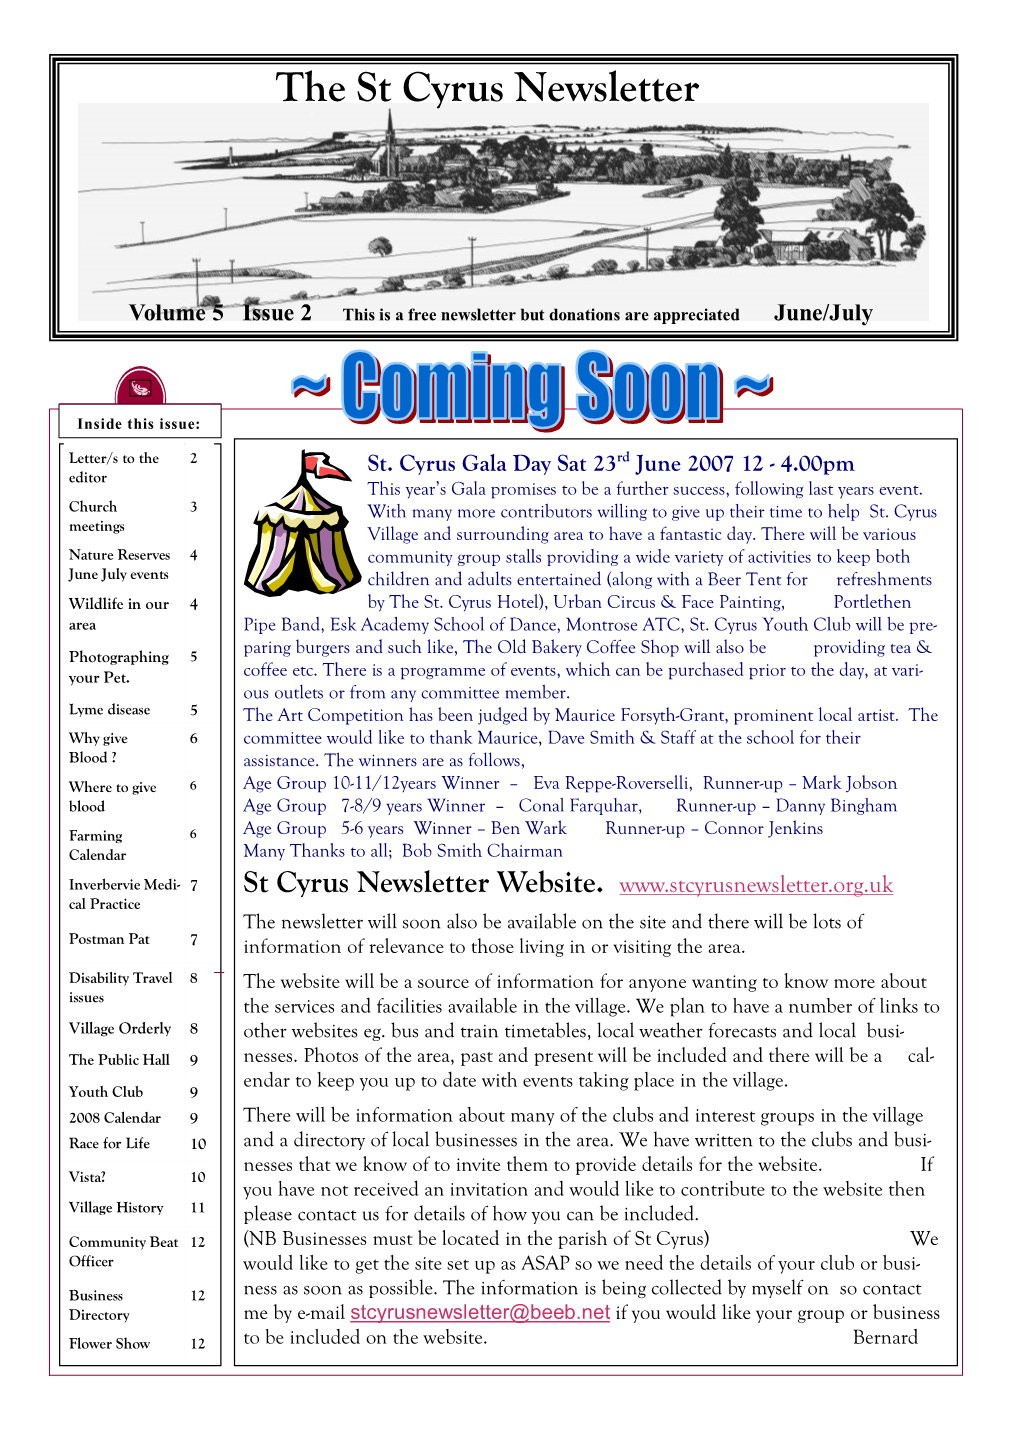 The St Cyrus Newsletter